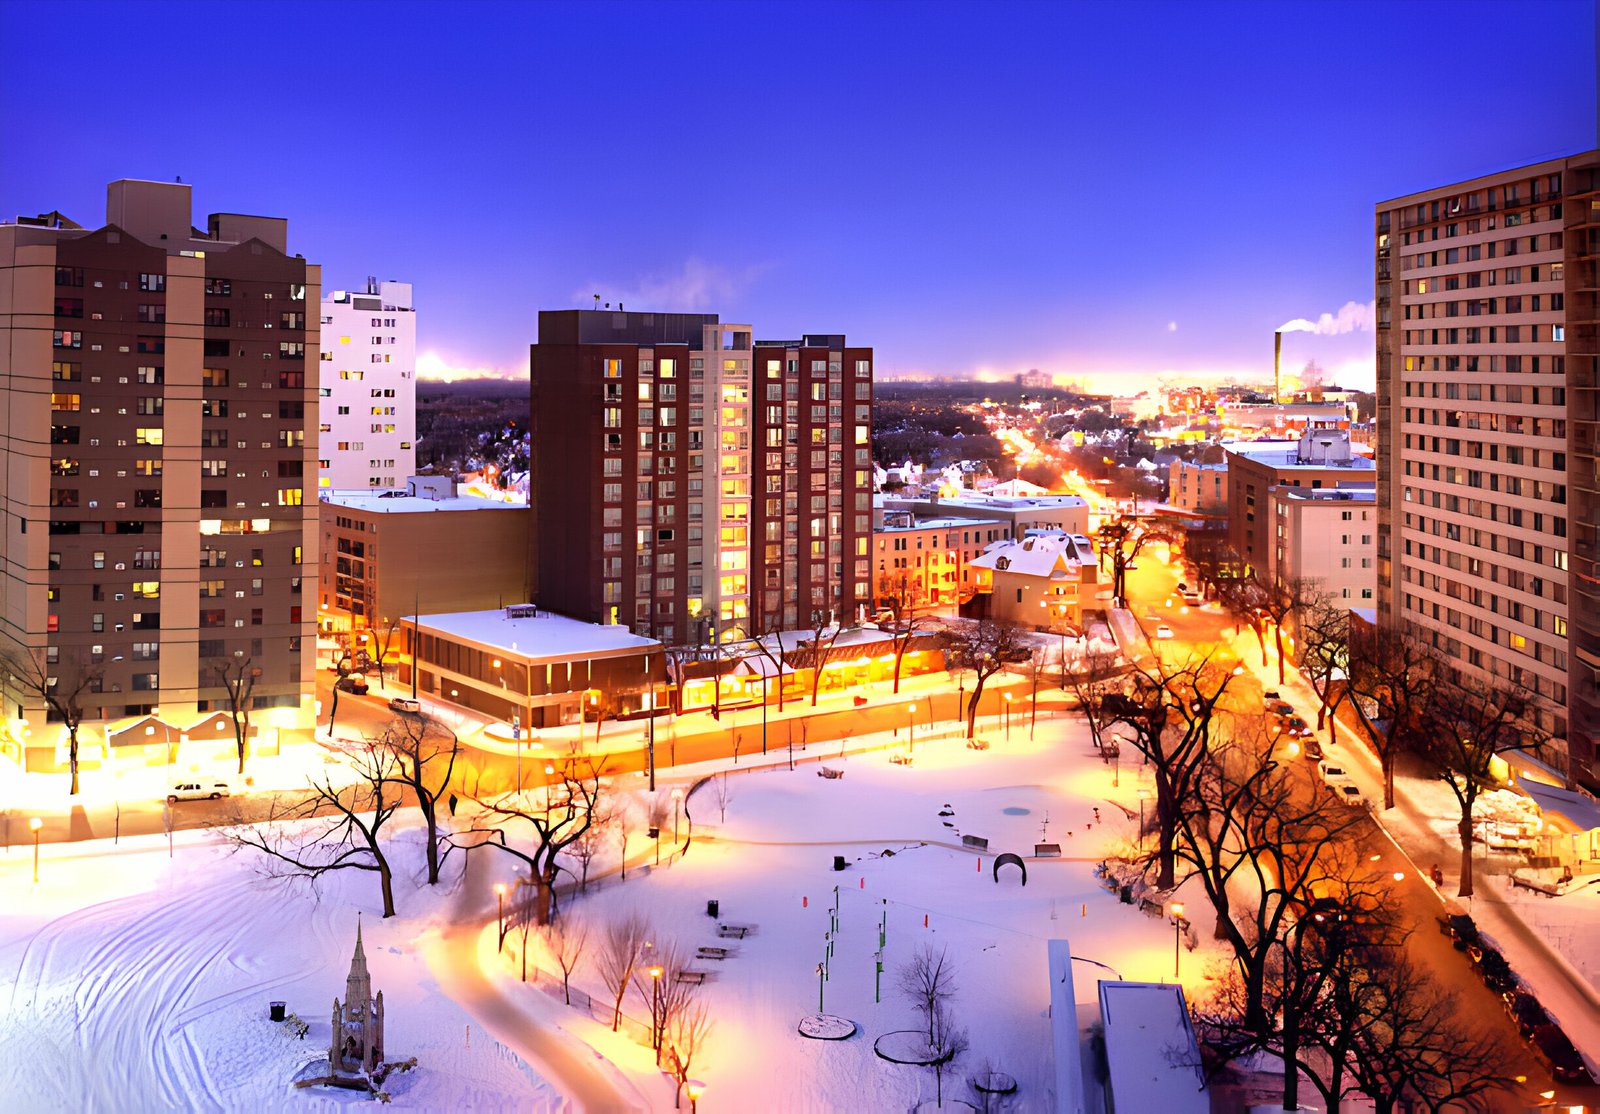 Twilight cityscape with snow-covered streets and illuminated buildings.